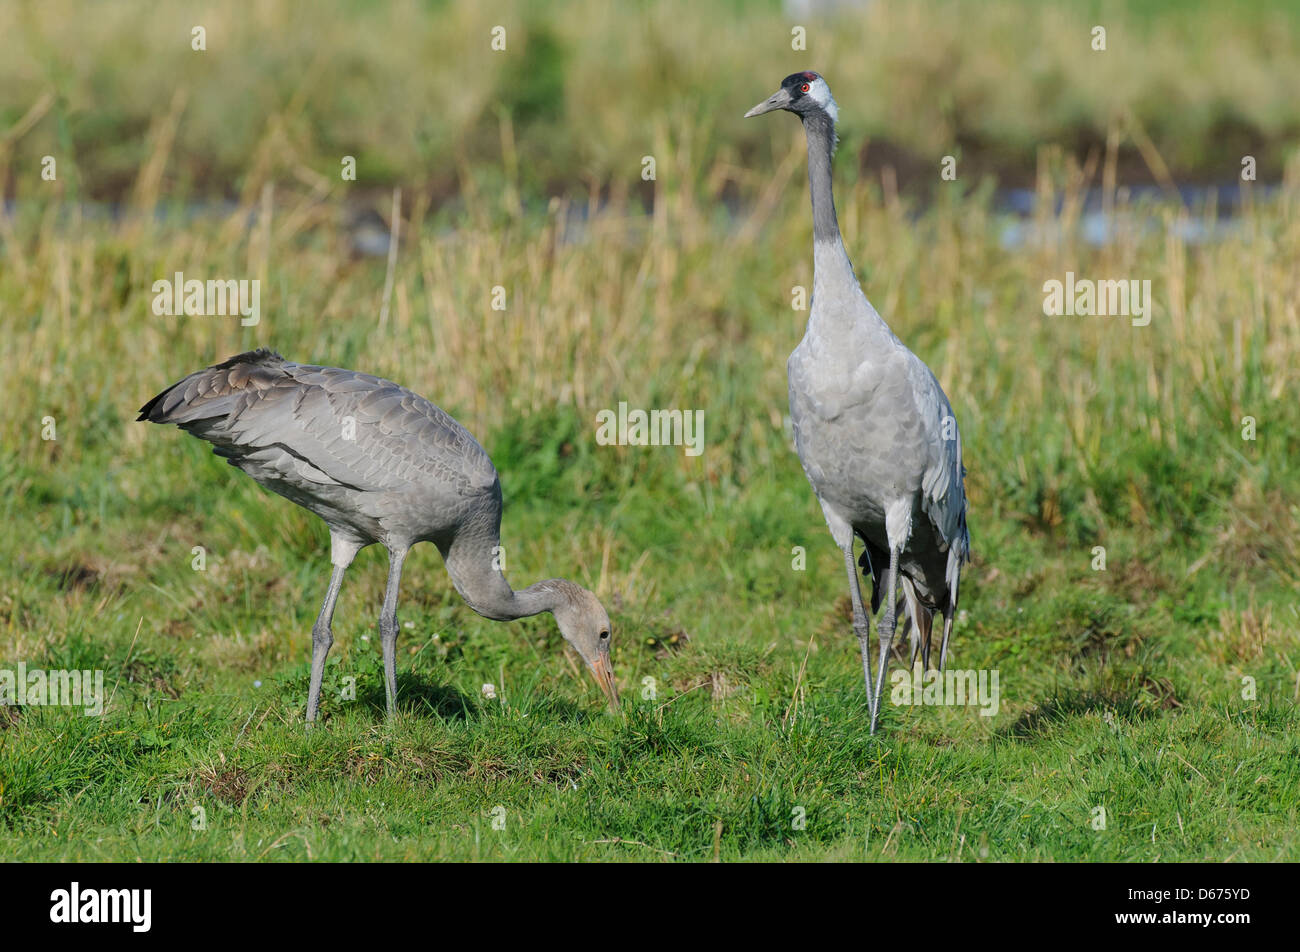 cranes on a meadow, grus grus, germany Stock Photo